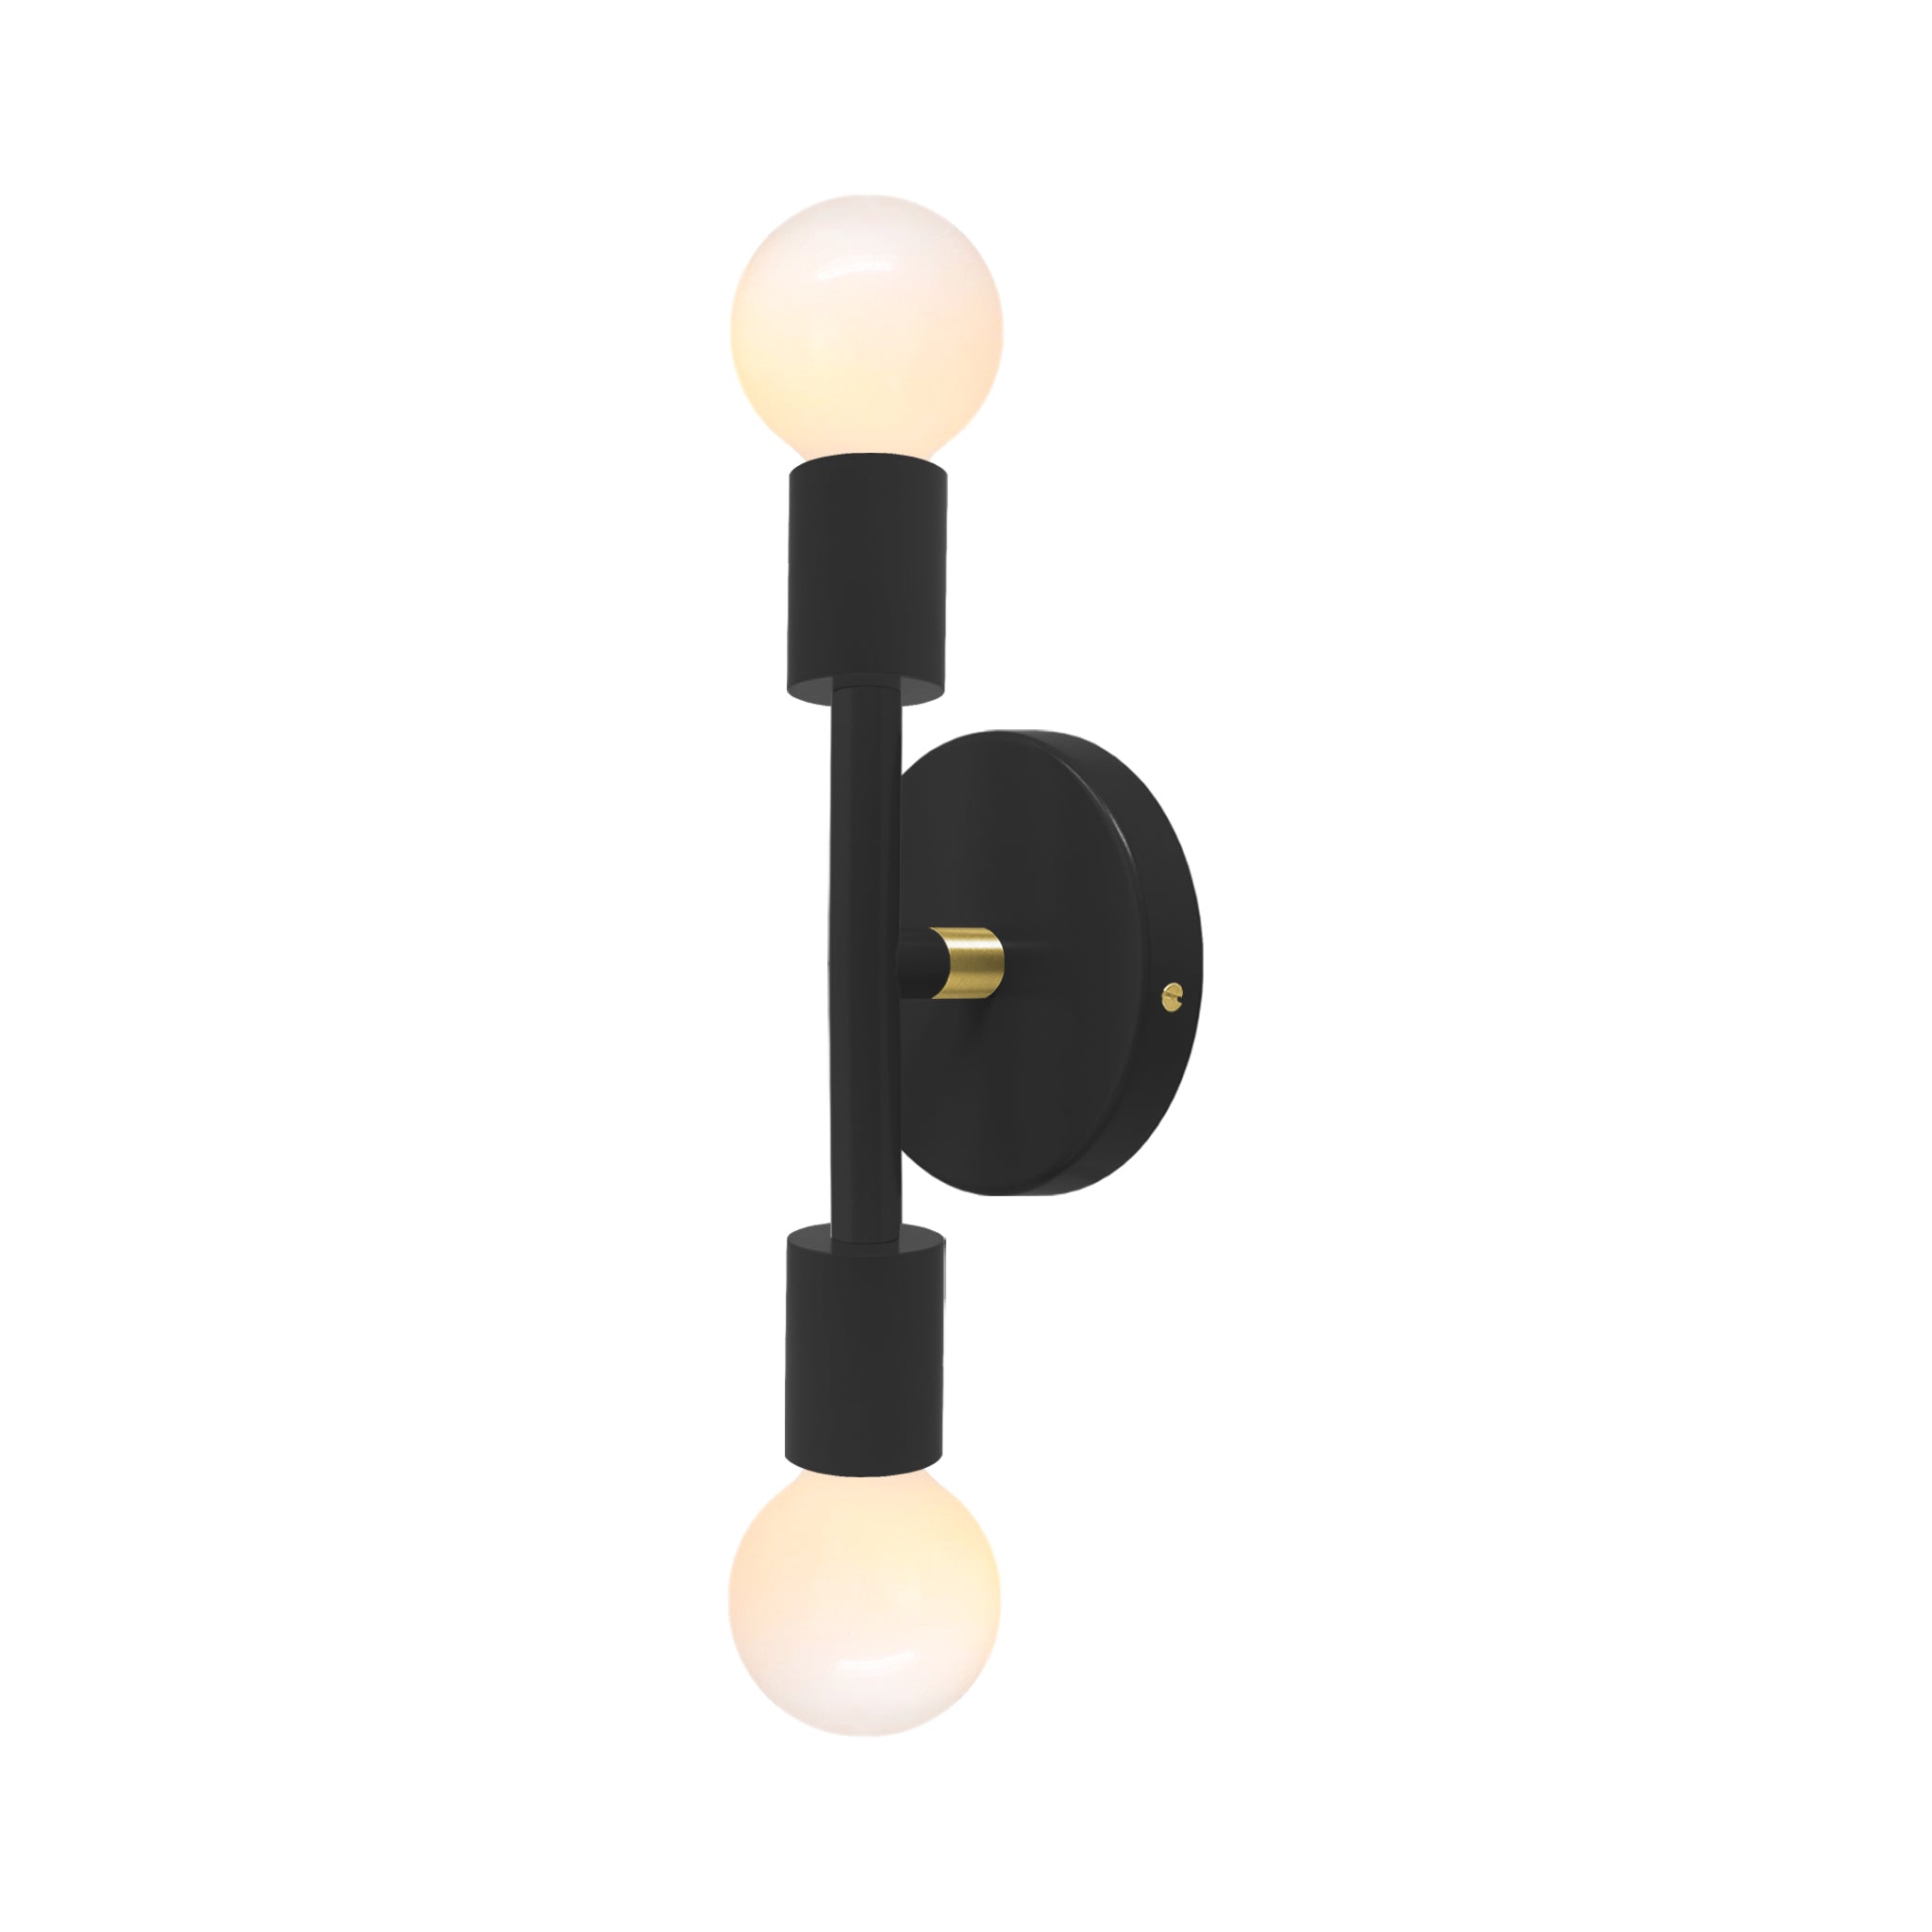 Brass and black color Pilot sconce 11" Dutton Brown lighting